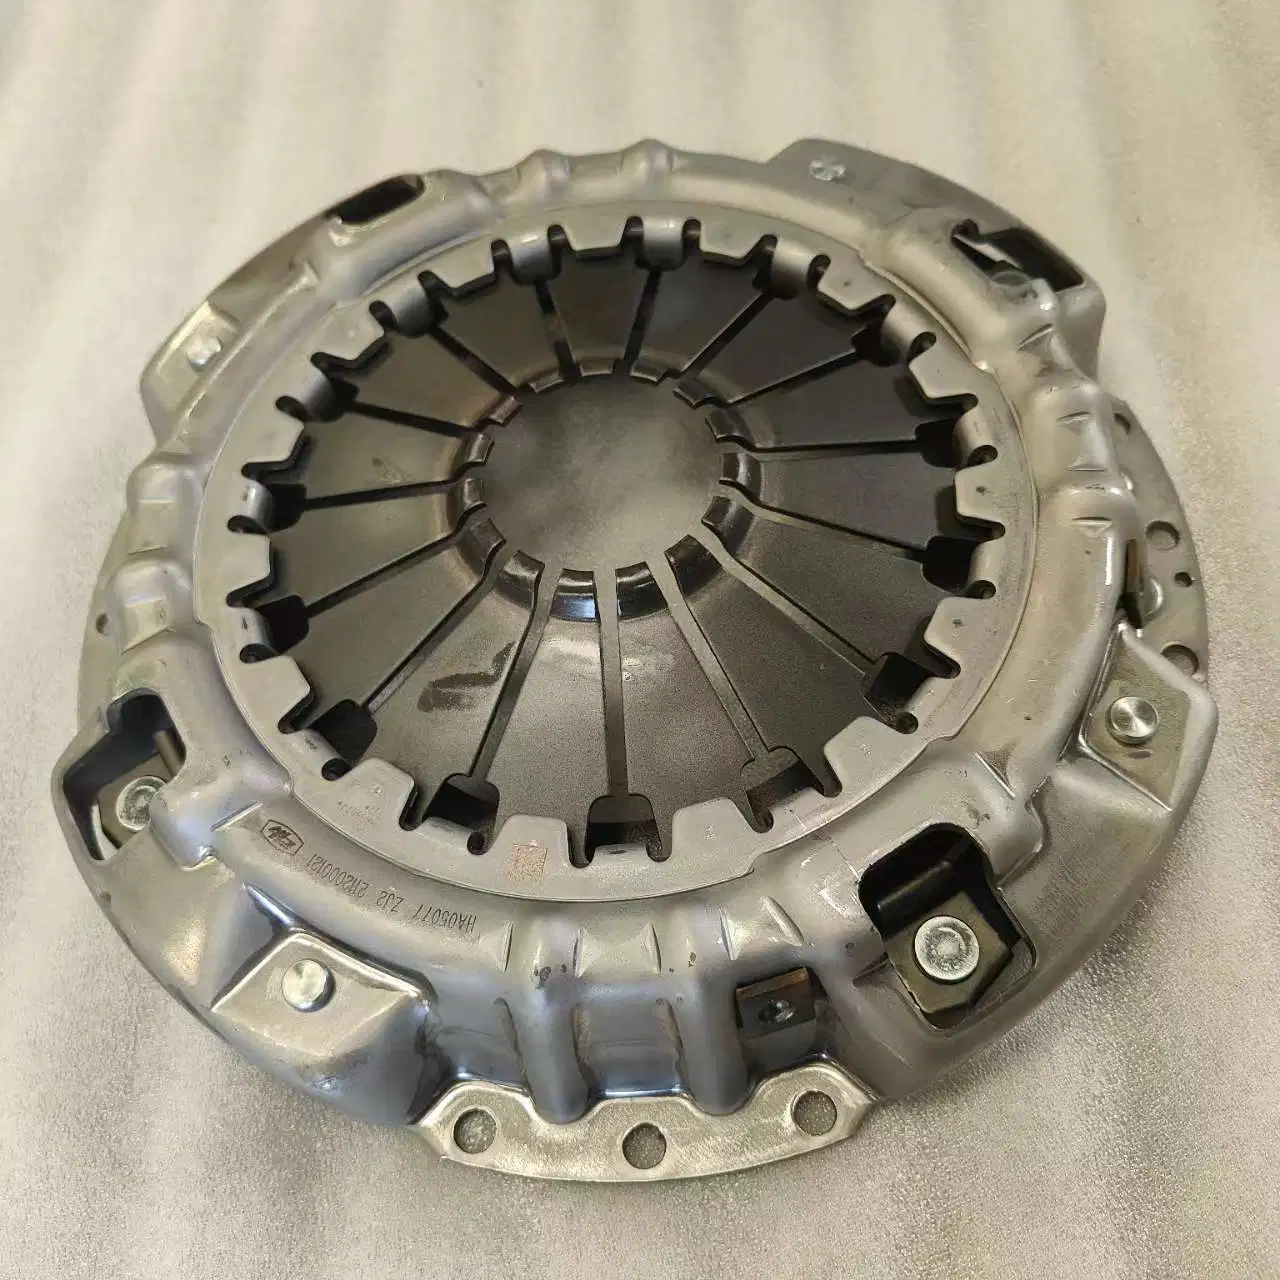 Hot Selling Sinotruk HOWO Light Truck Spare Parts Gearbox Spare Parts Ha05077 Clutch Disc with Good Price